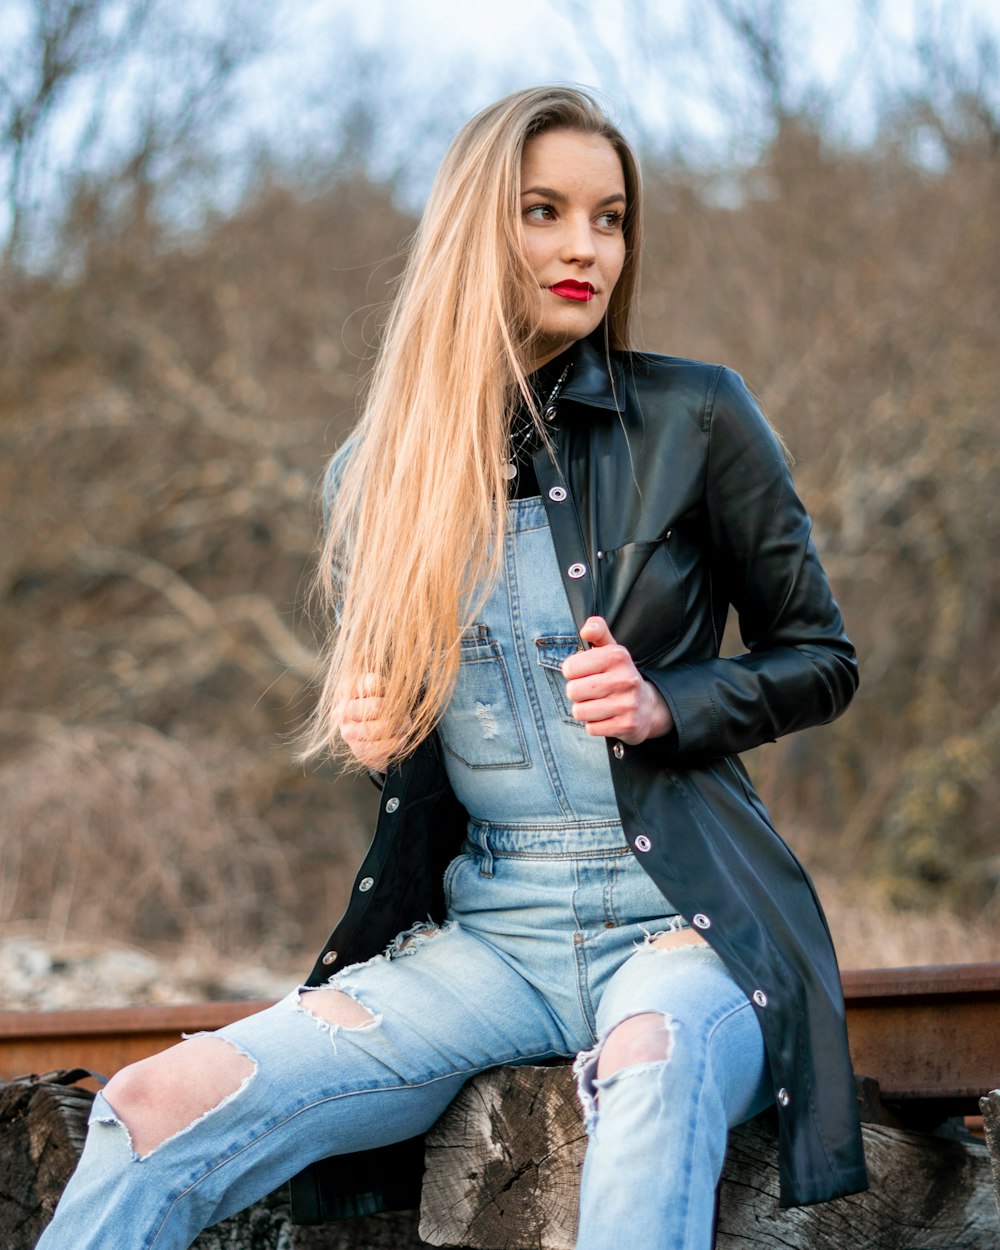 woman in black leather jacket and blue denim jeans sitting on brown wooden bench during daytime